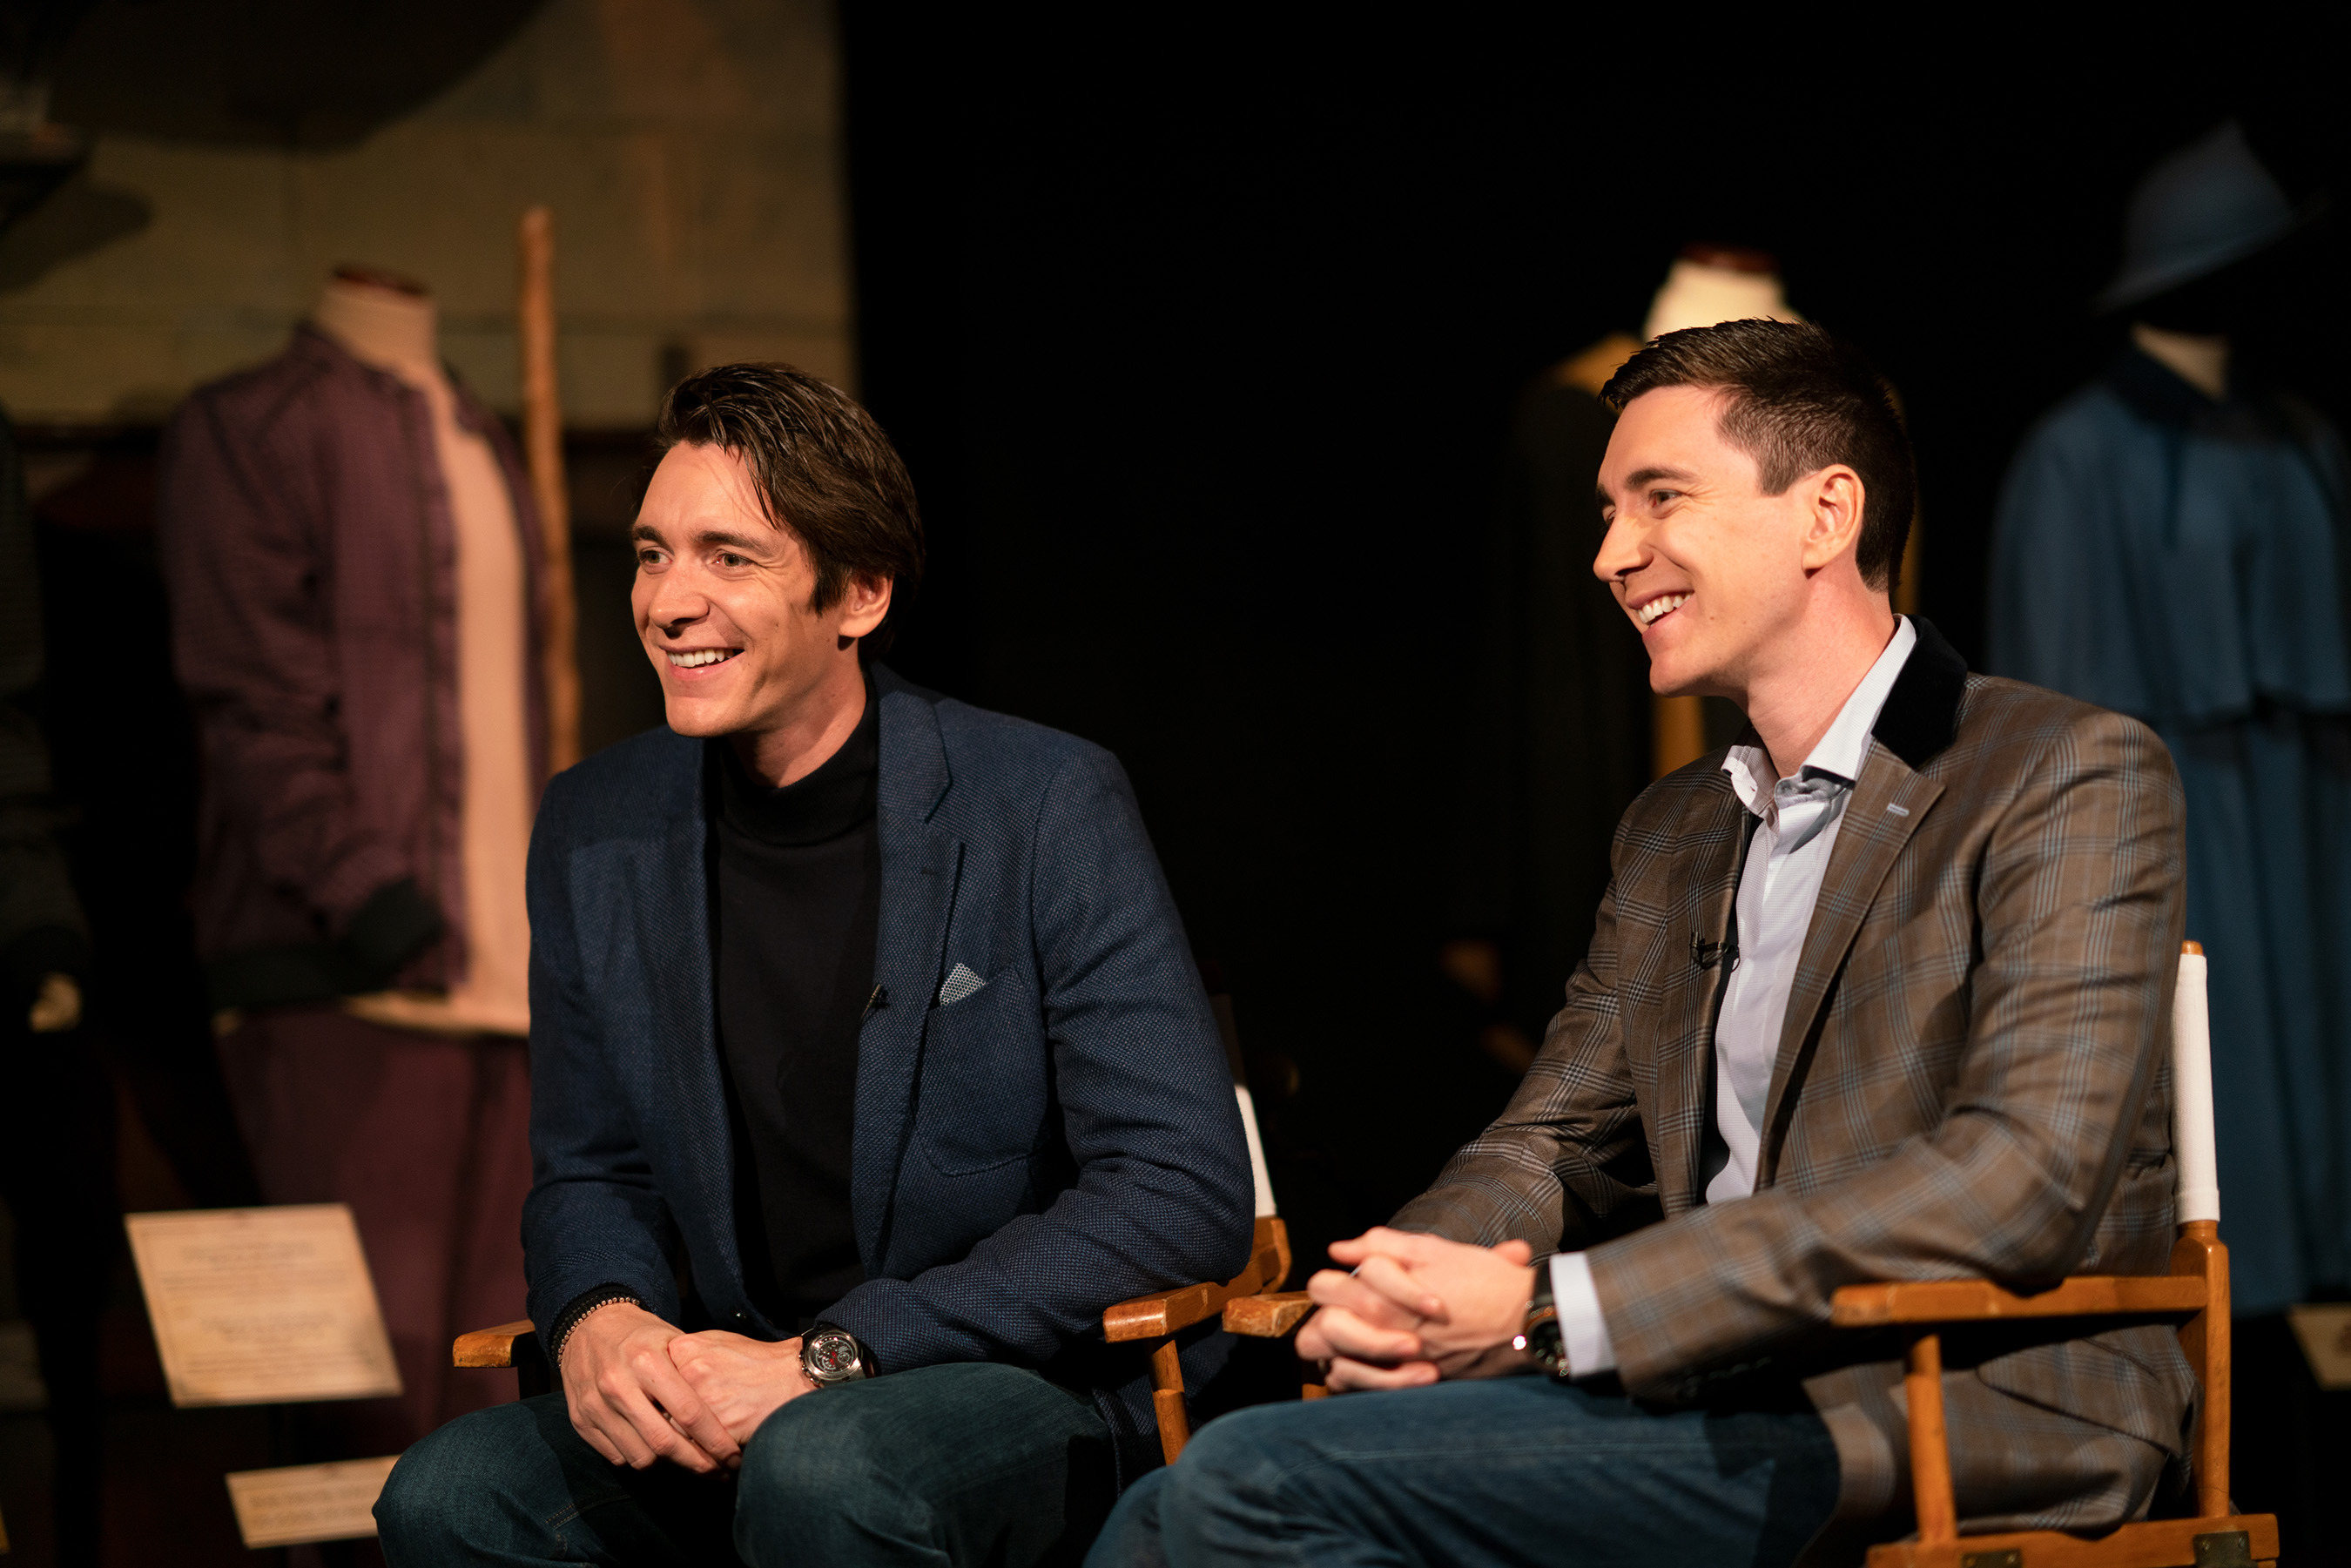 Film actors, James Phelps and Oliver Phelps at Harry Potter™: The Exhibition at the Pavilion of Portugal in Lisbon, Portugal